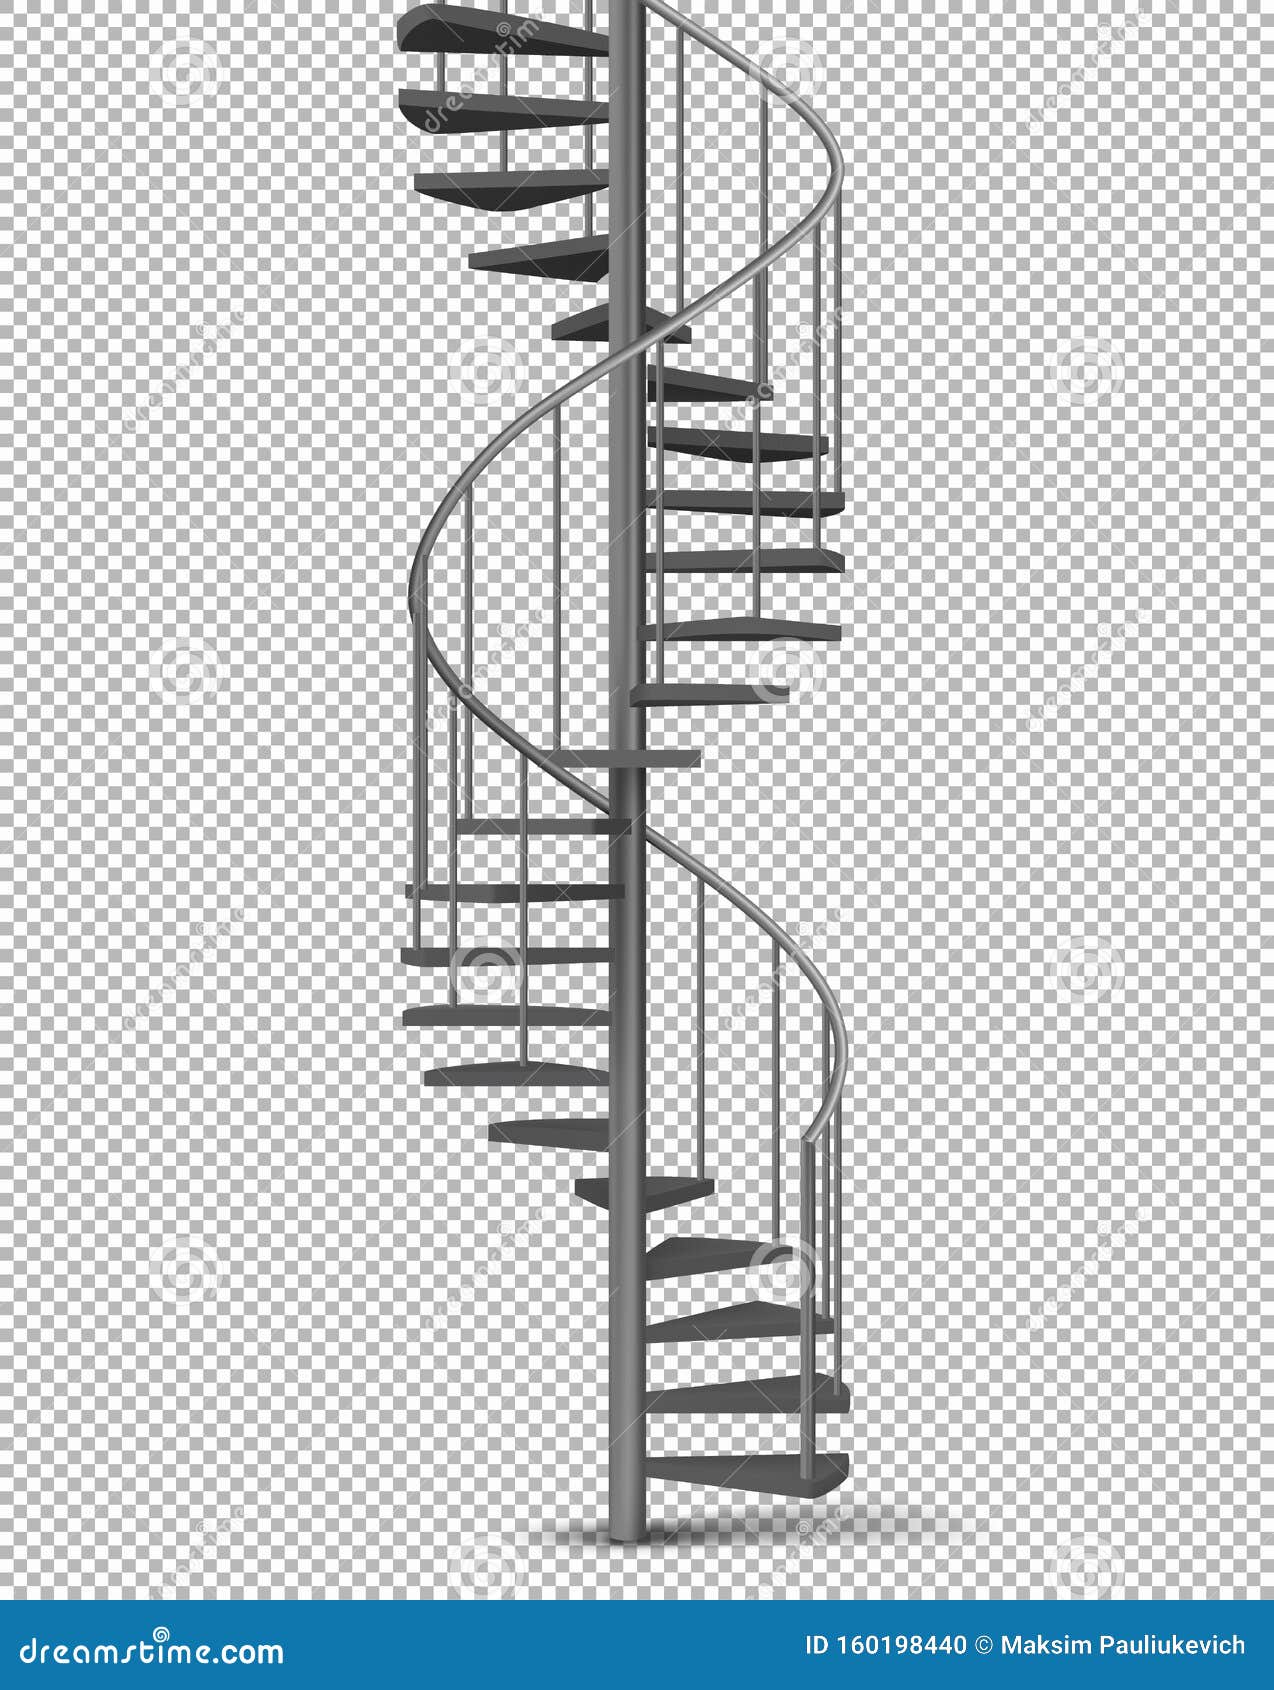 metal spiral, helical staircase realistic 